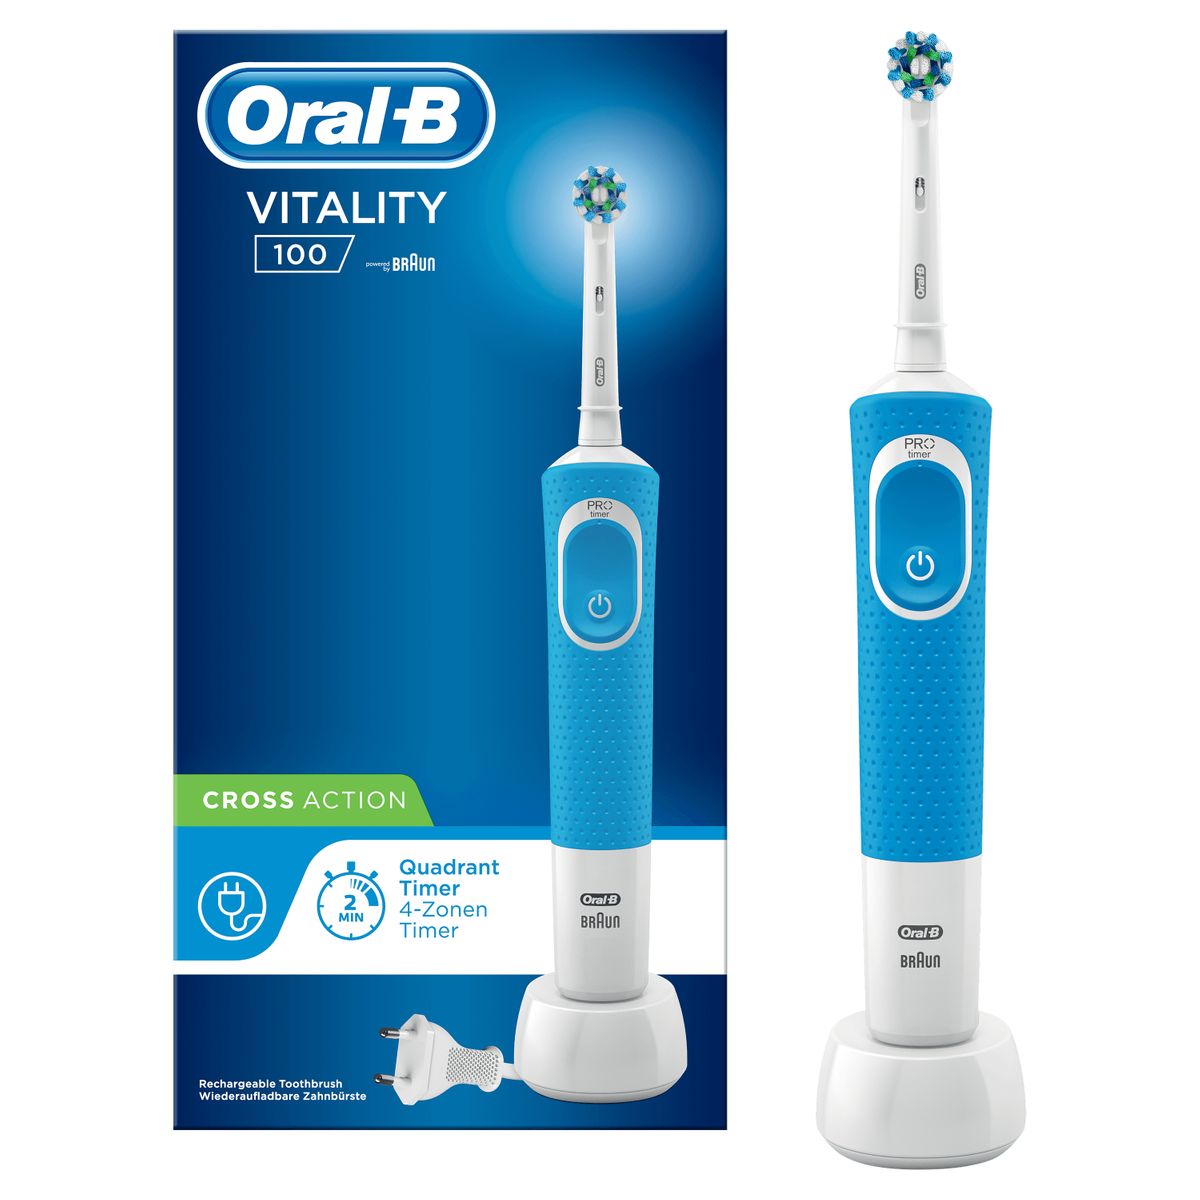 Oral-B Vitality 100 Electric Toothbrush, 1 cleaning program, timer, 1 CrossAction brush, blue